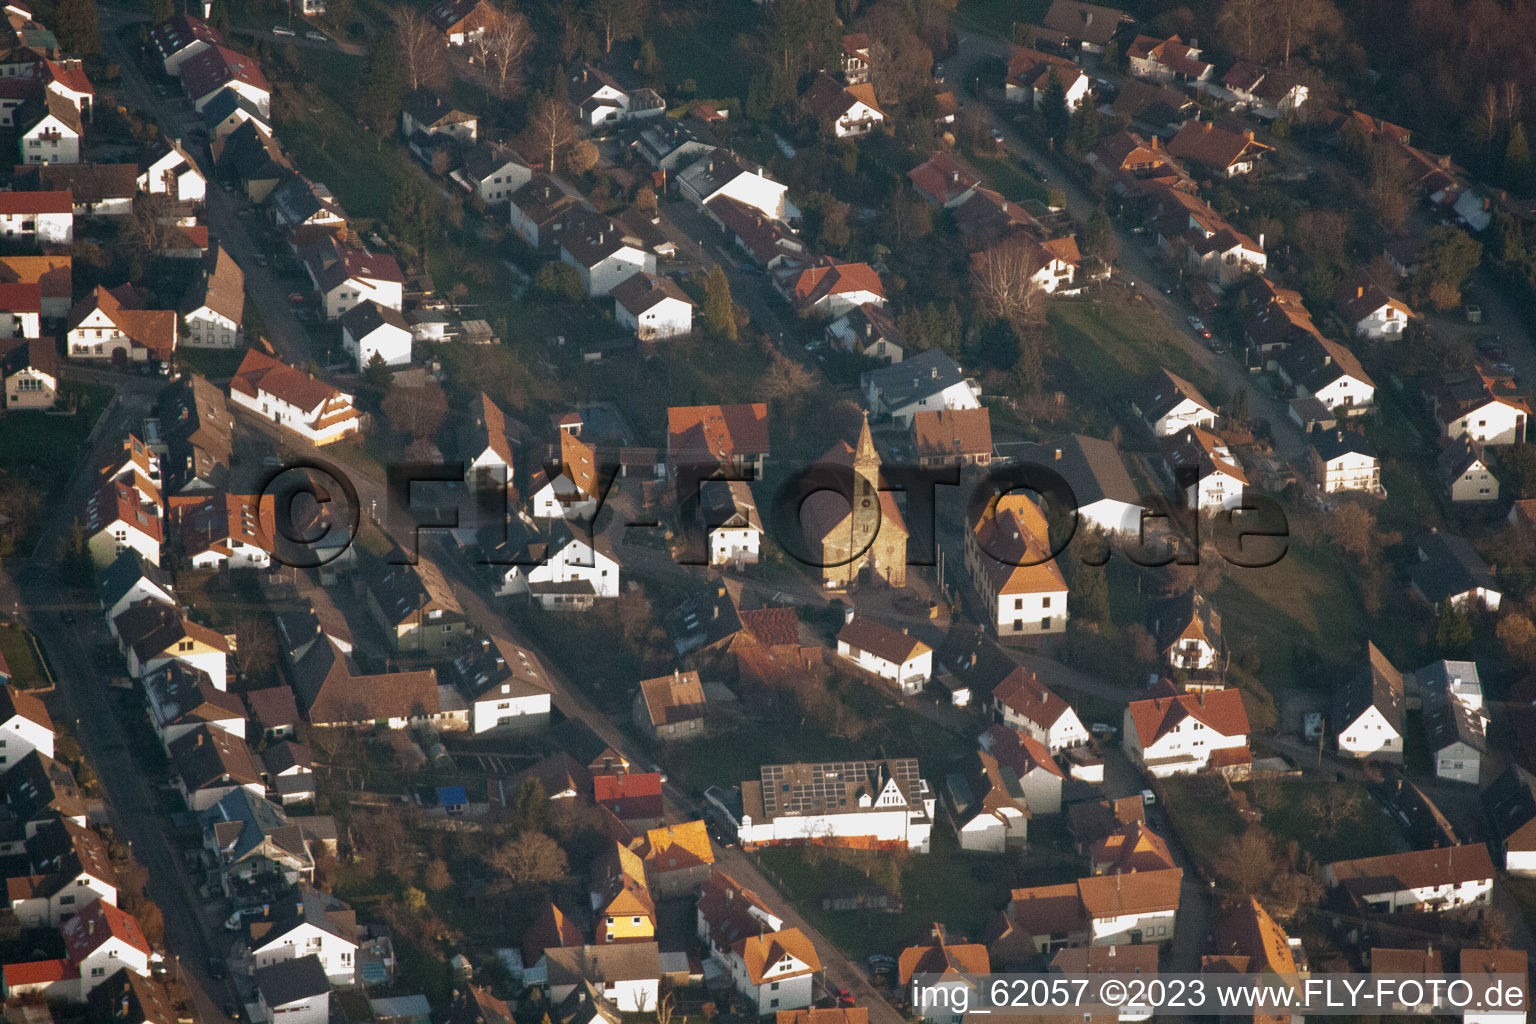 Burbach in the state Baden-Wuerttemberg, Germany seen from above